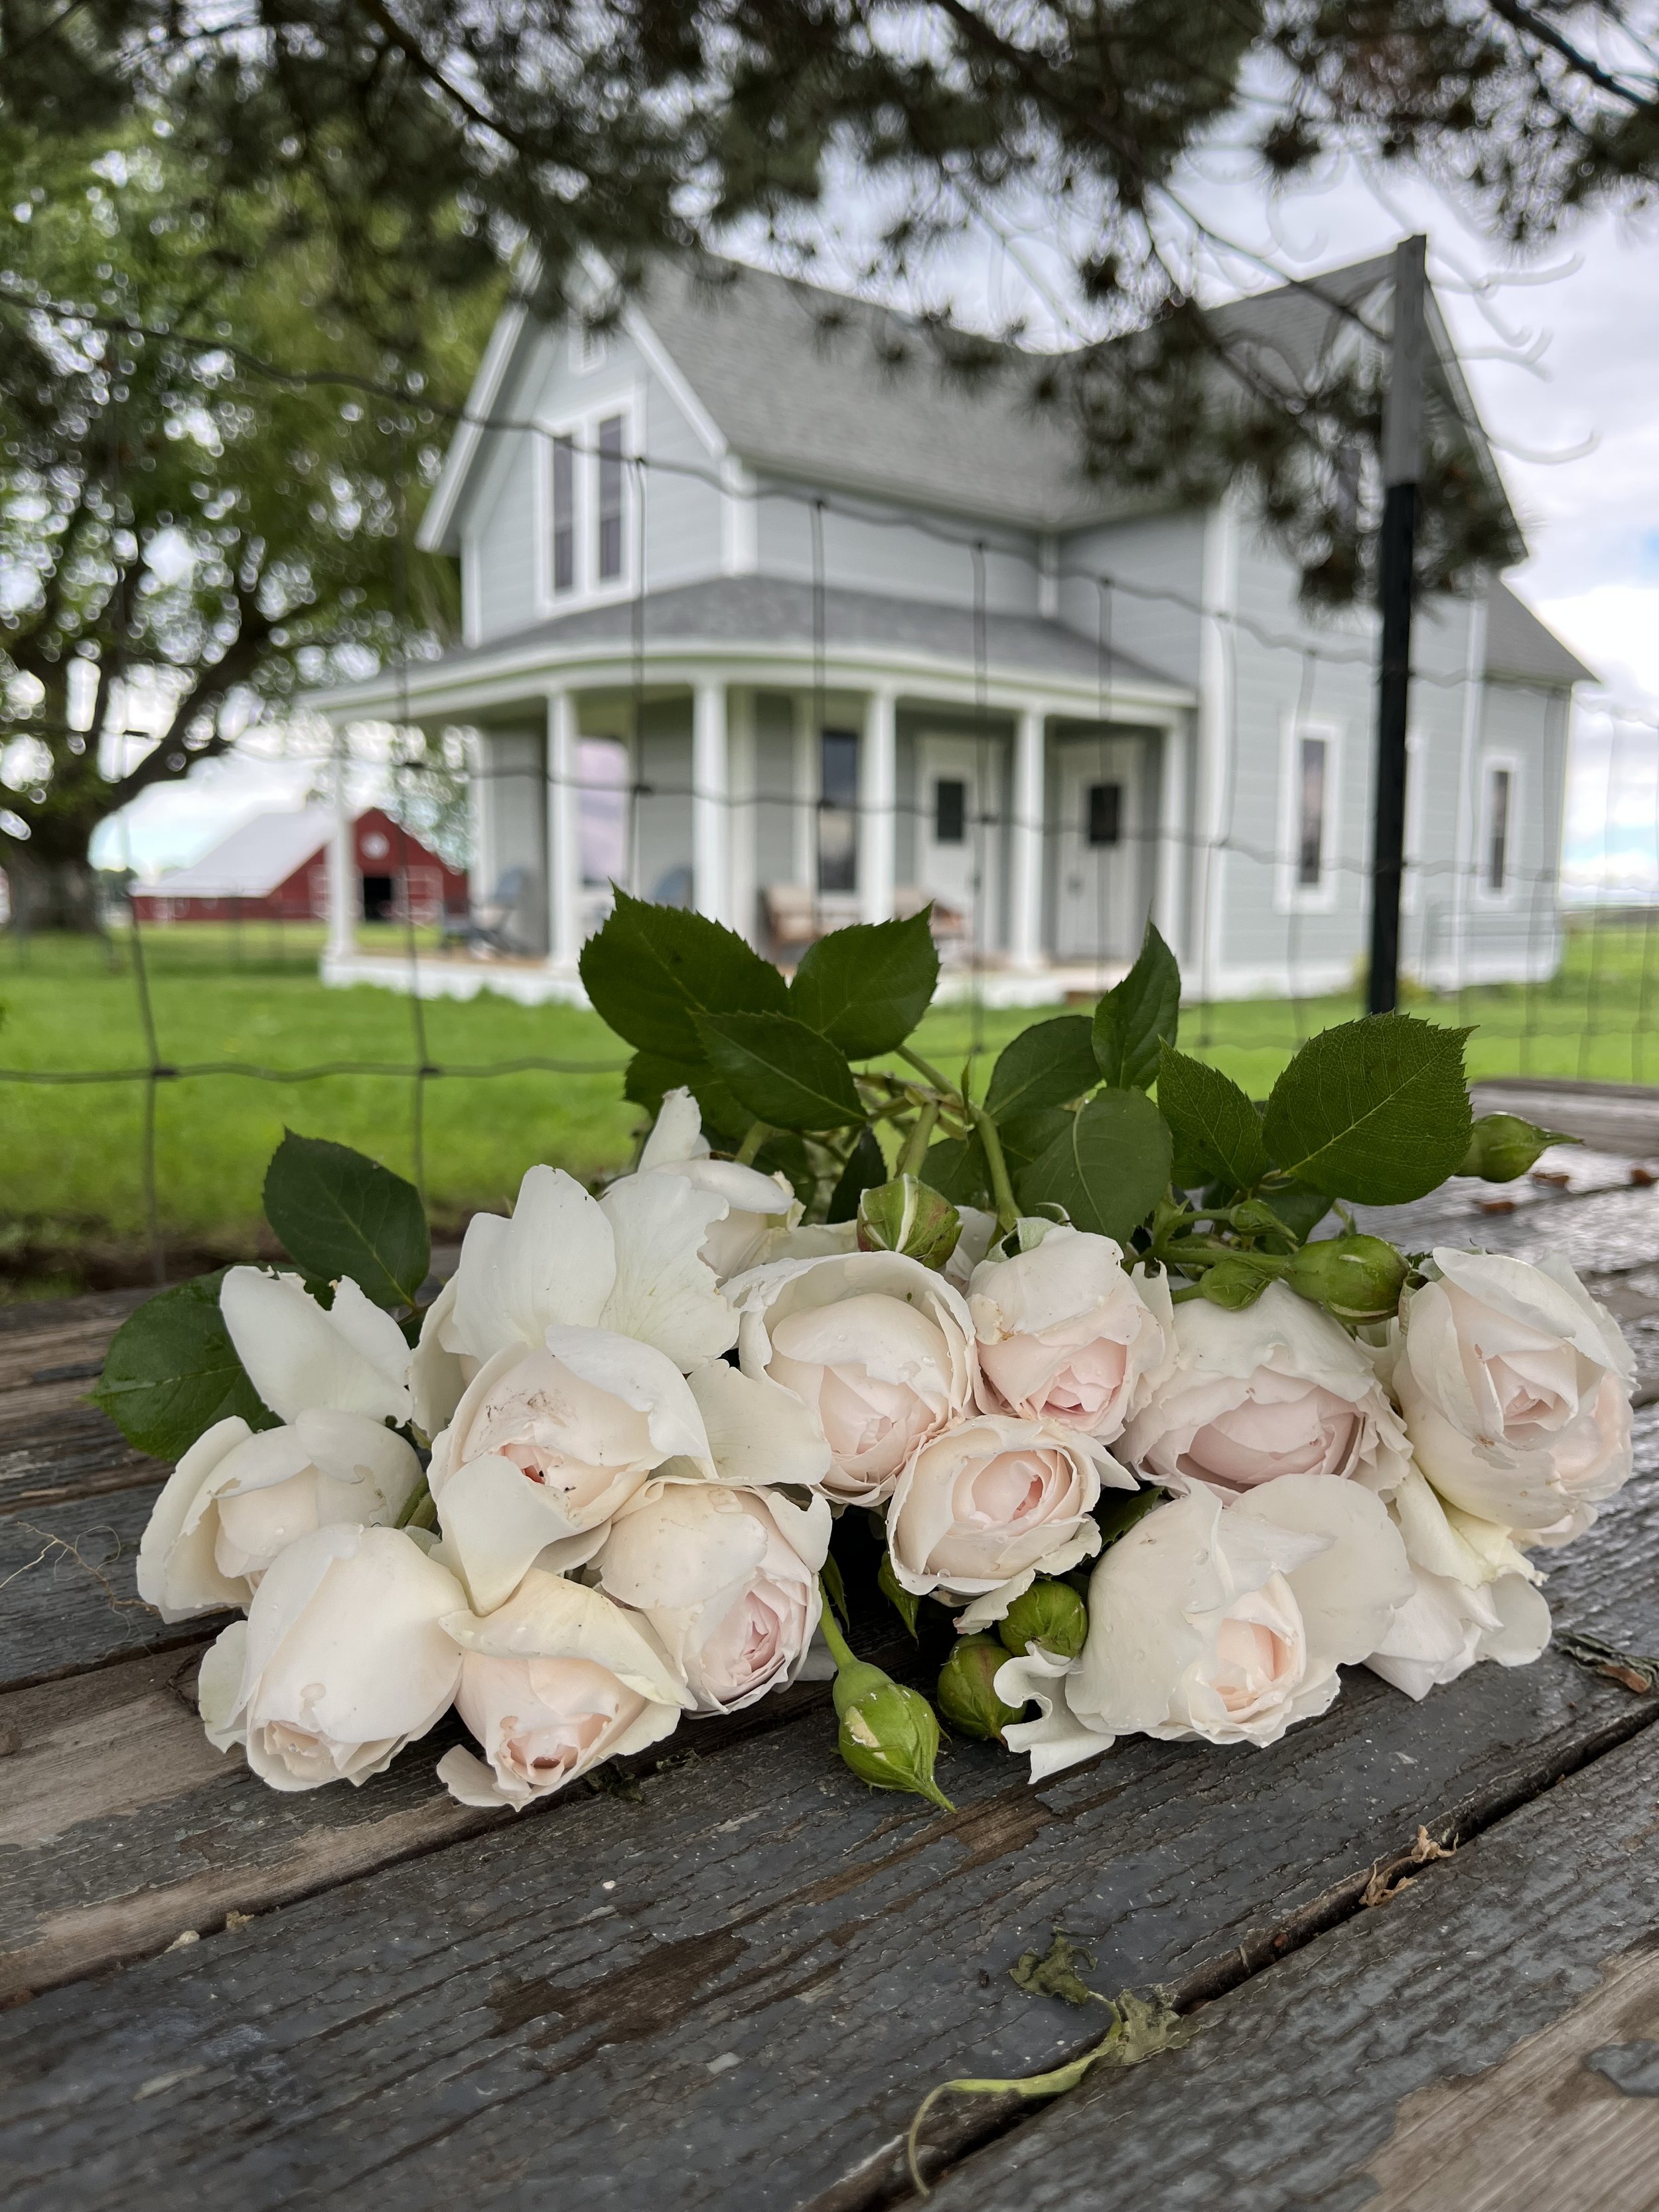 roses on a table with a farmhouse in the background